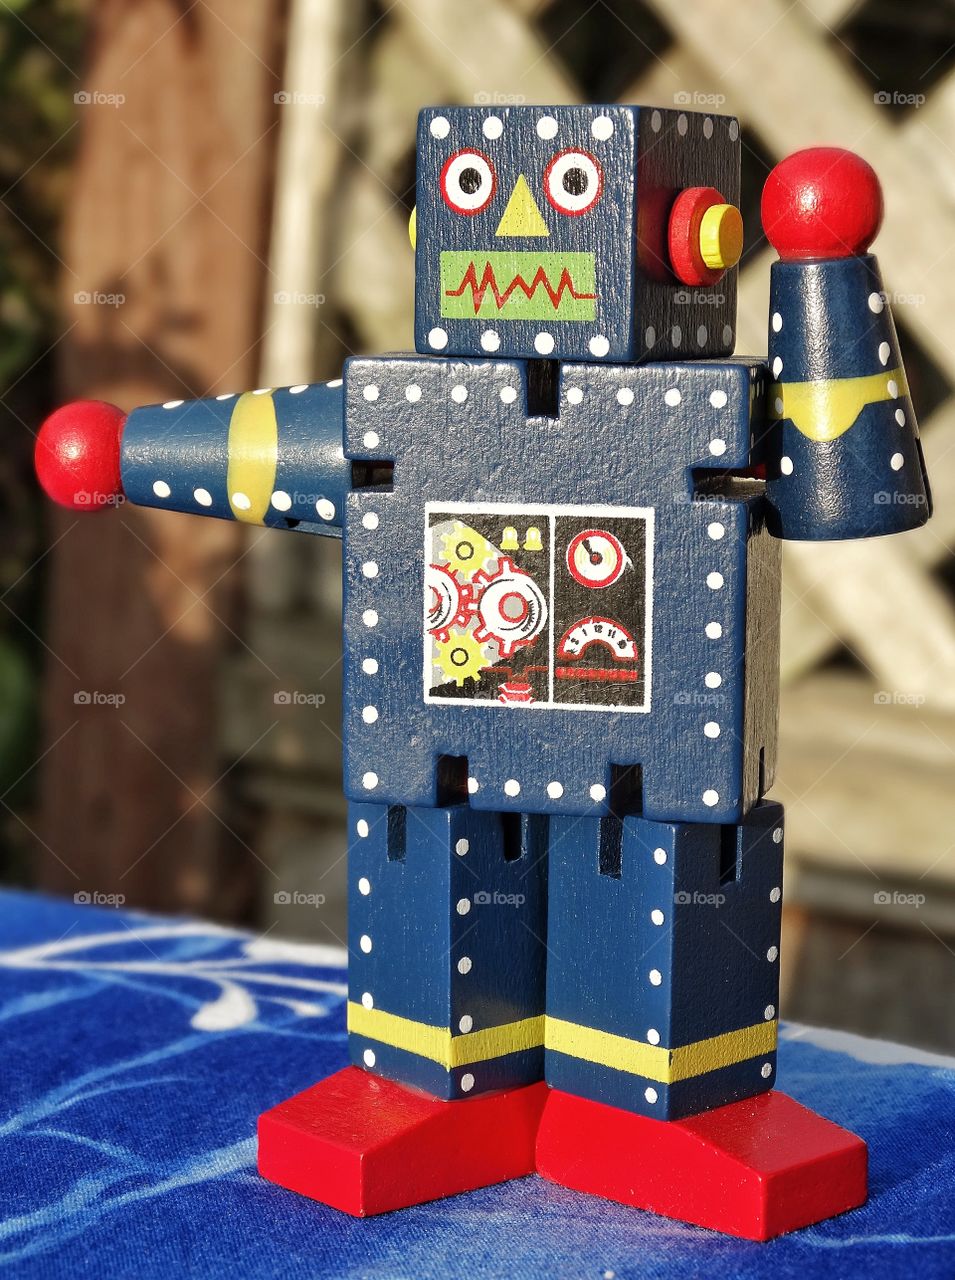 Colorful Toy Robot. Brilliantly Colored Old Fashioned Wooden Toy Robot
